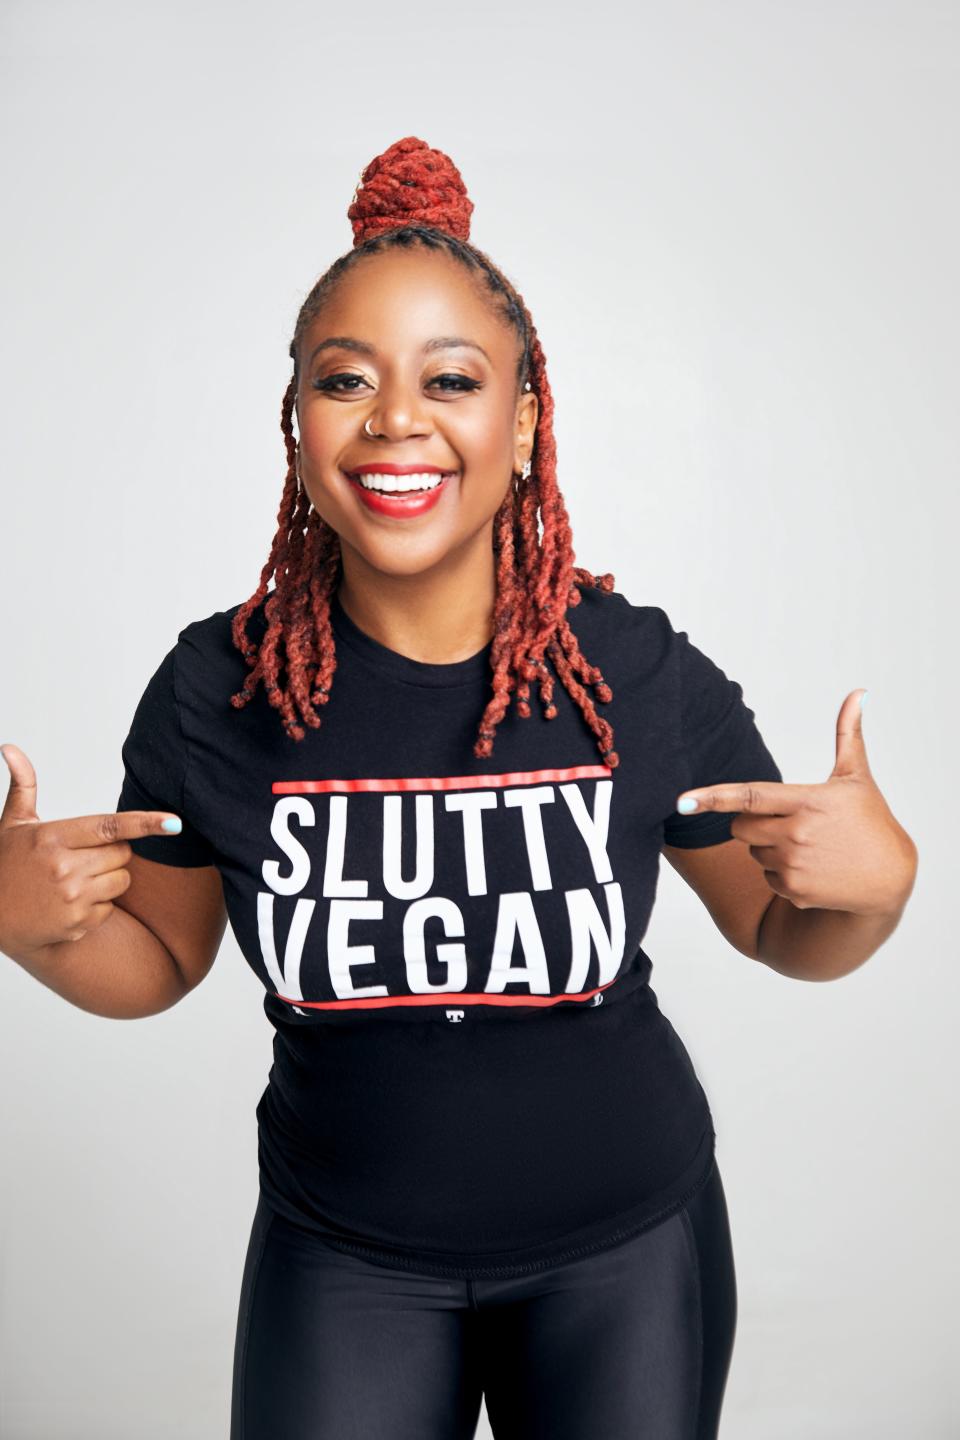 Pinky Cole is the founder and driving force behind Slutty Vegan, a meat-free burger restaurant in Atlanta. (Courtesy Slutty Vegan)